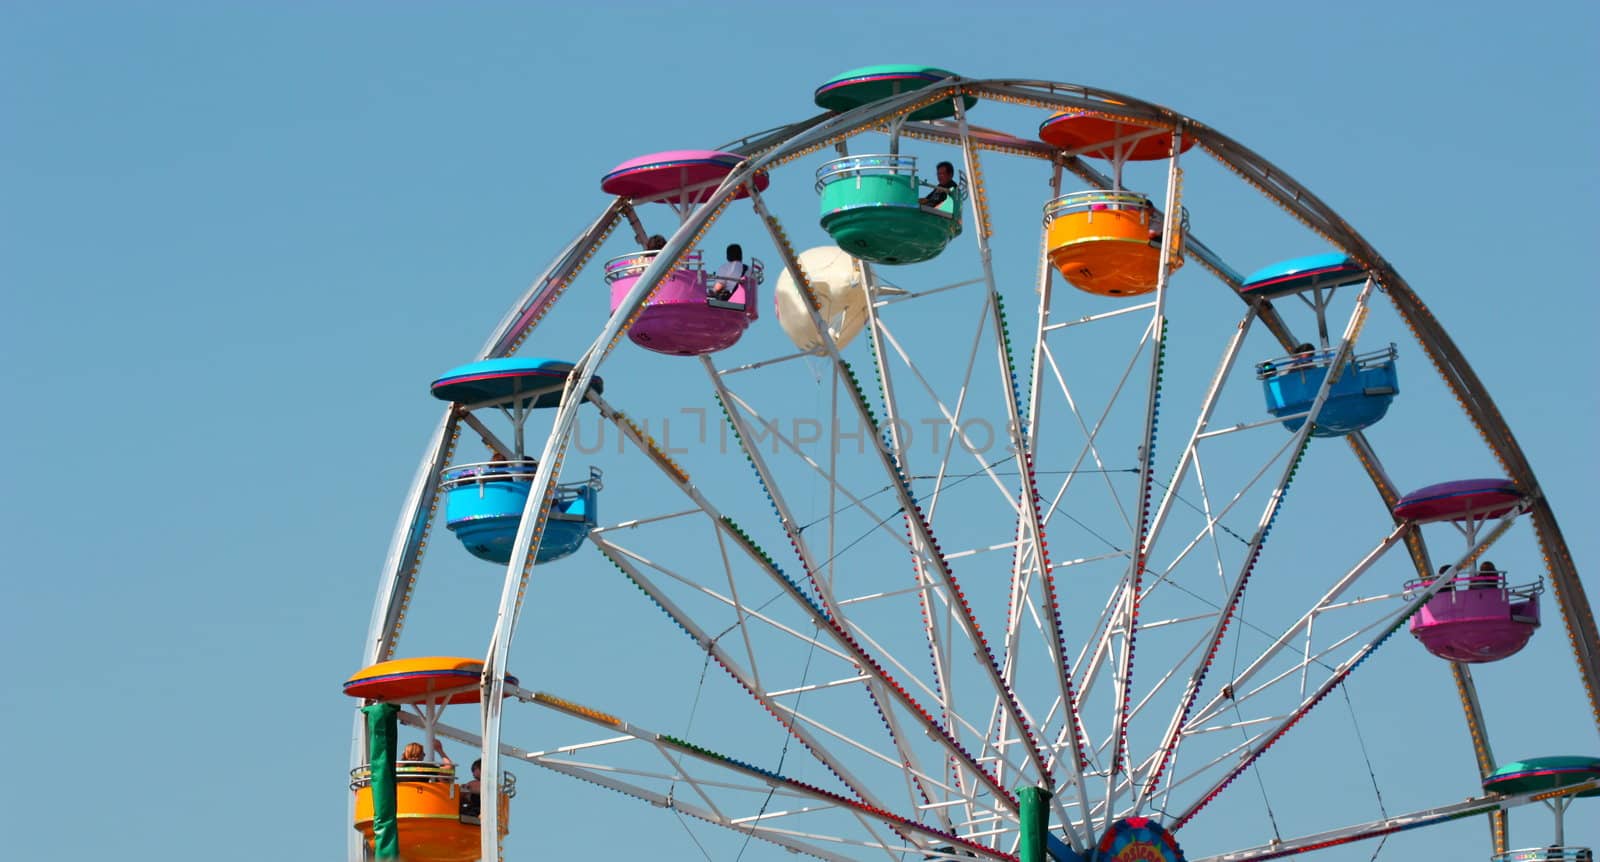 Ferris wheel ride, colorful against a clear blue sky by jayvivid